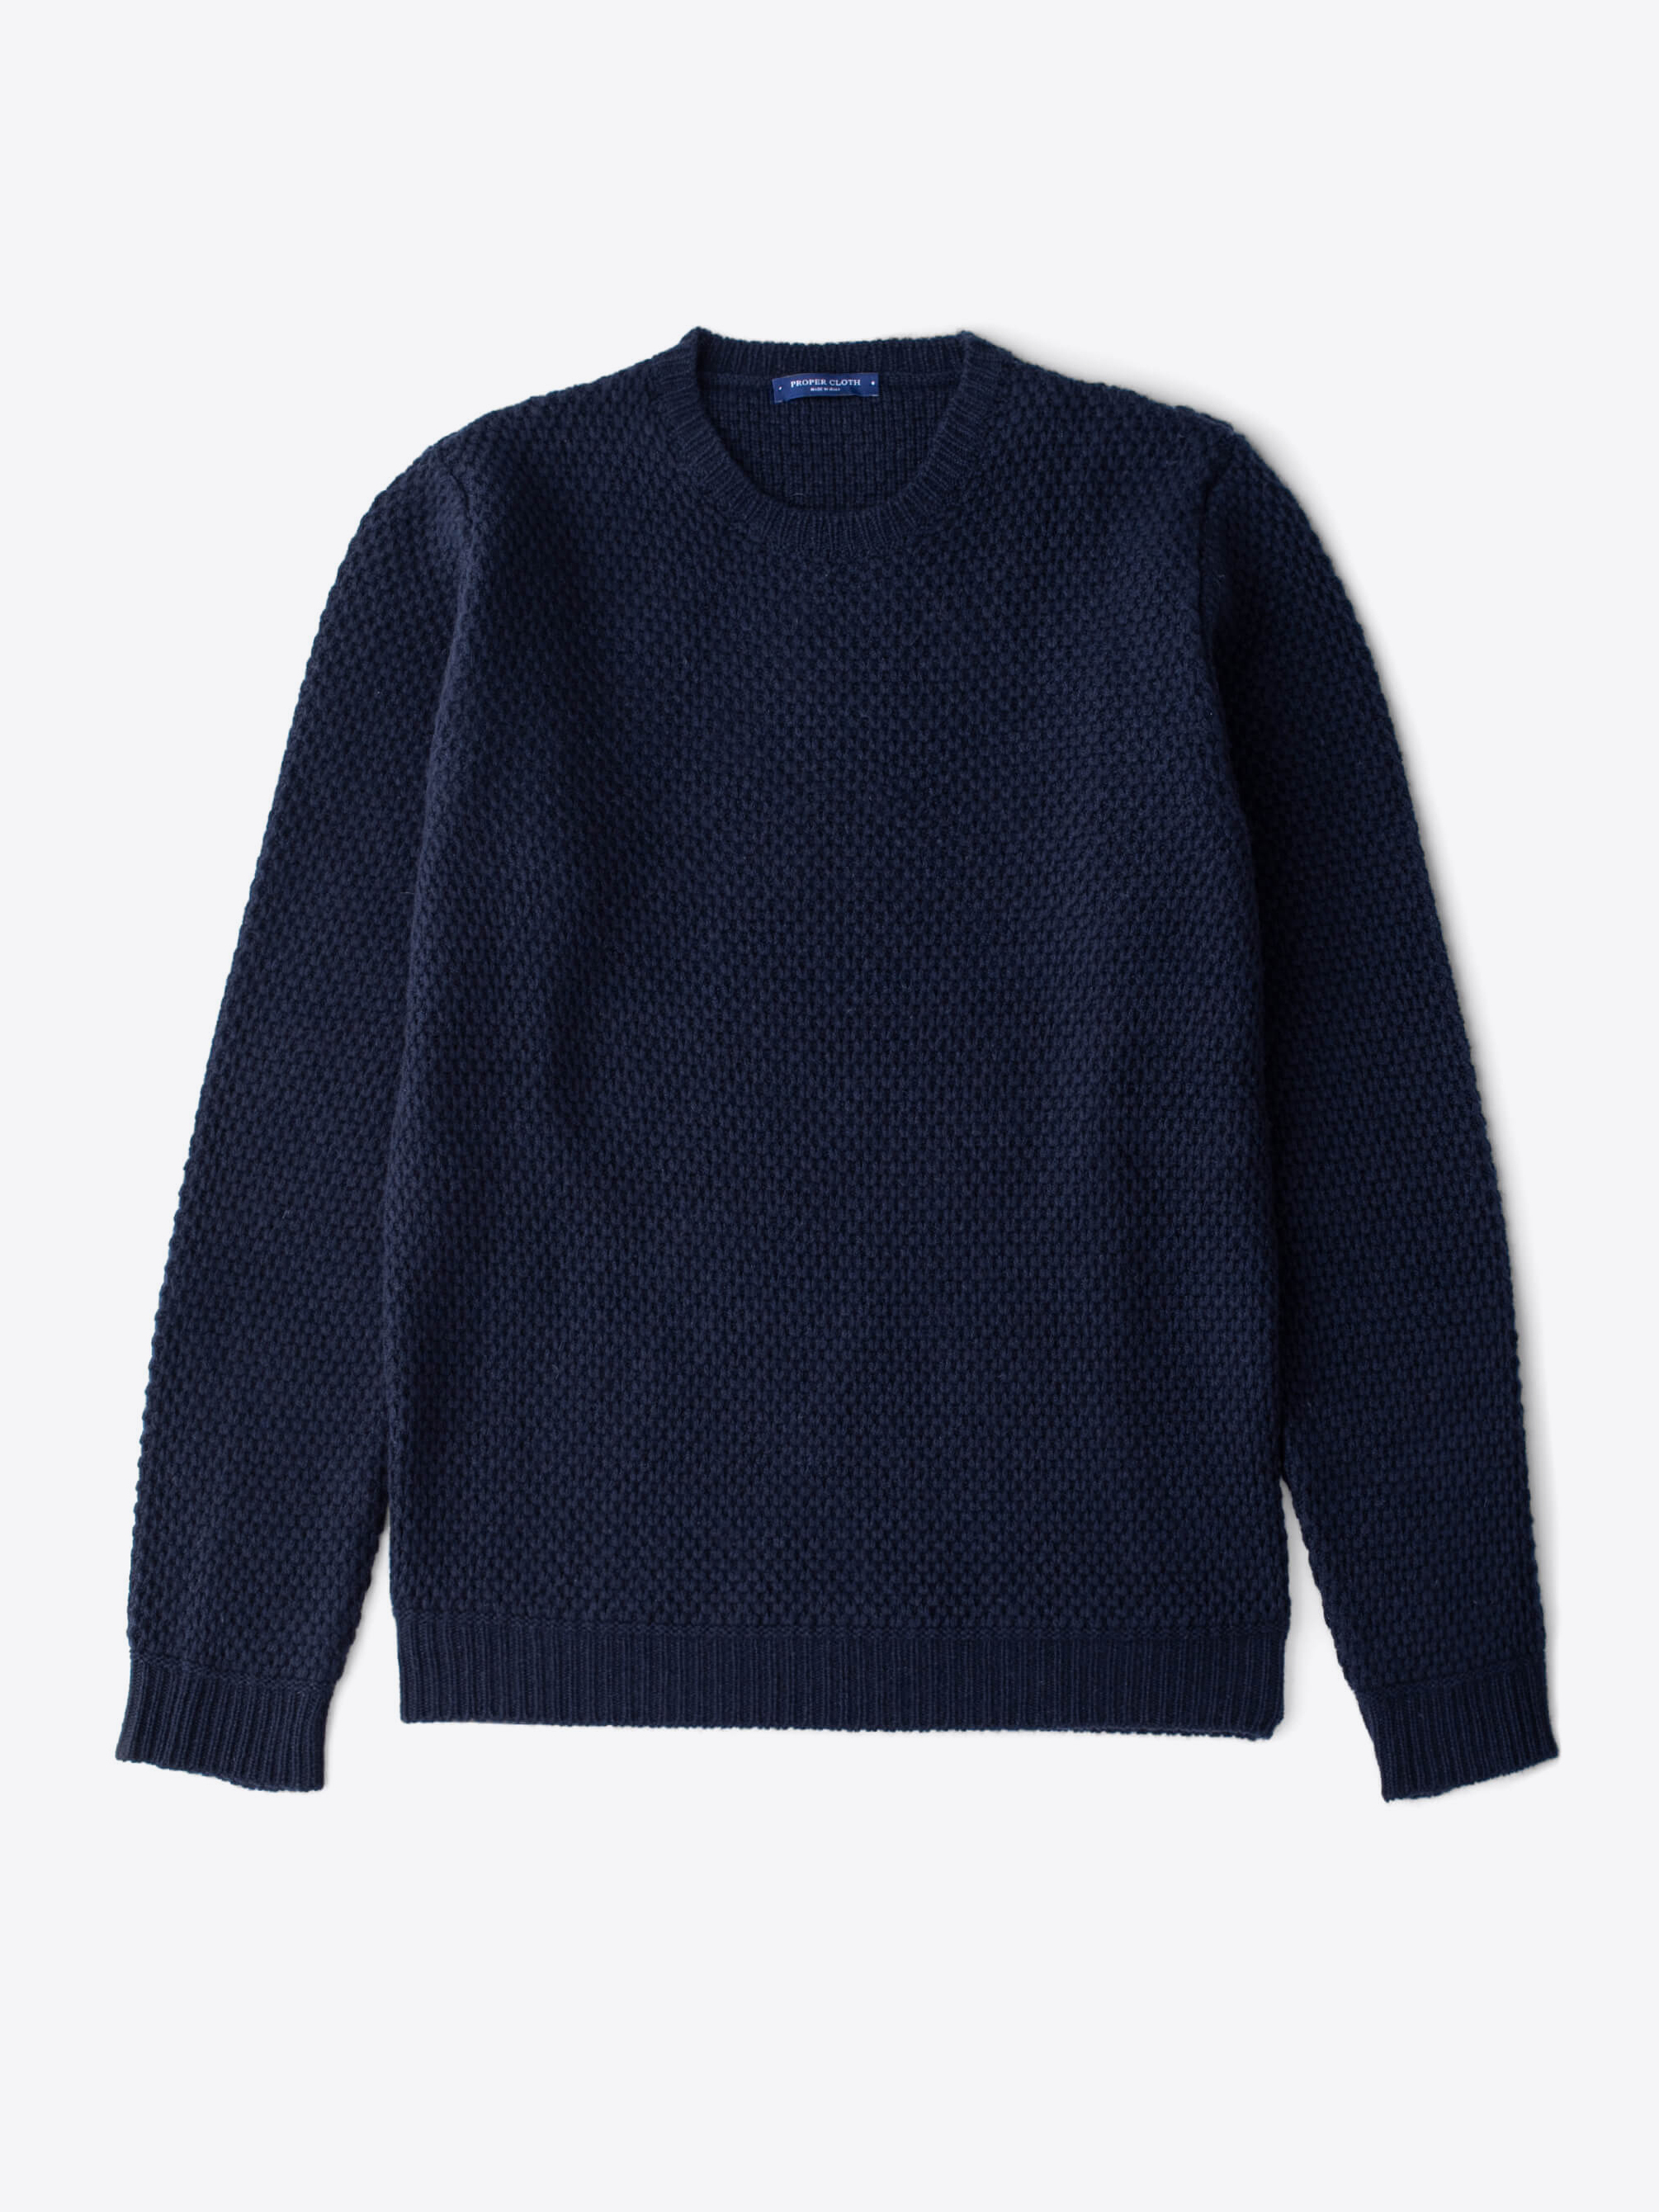 Zoom Image of Navy Wool and Cashmere Basket Stitch Sweater